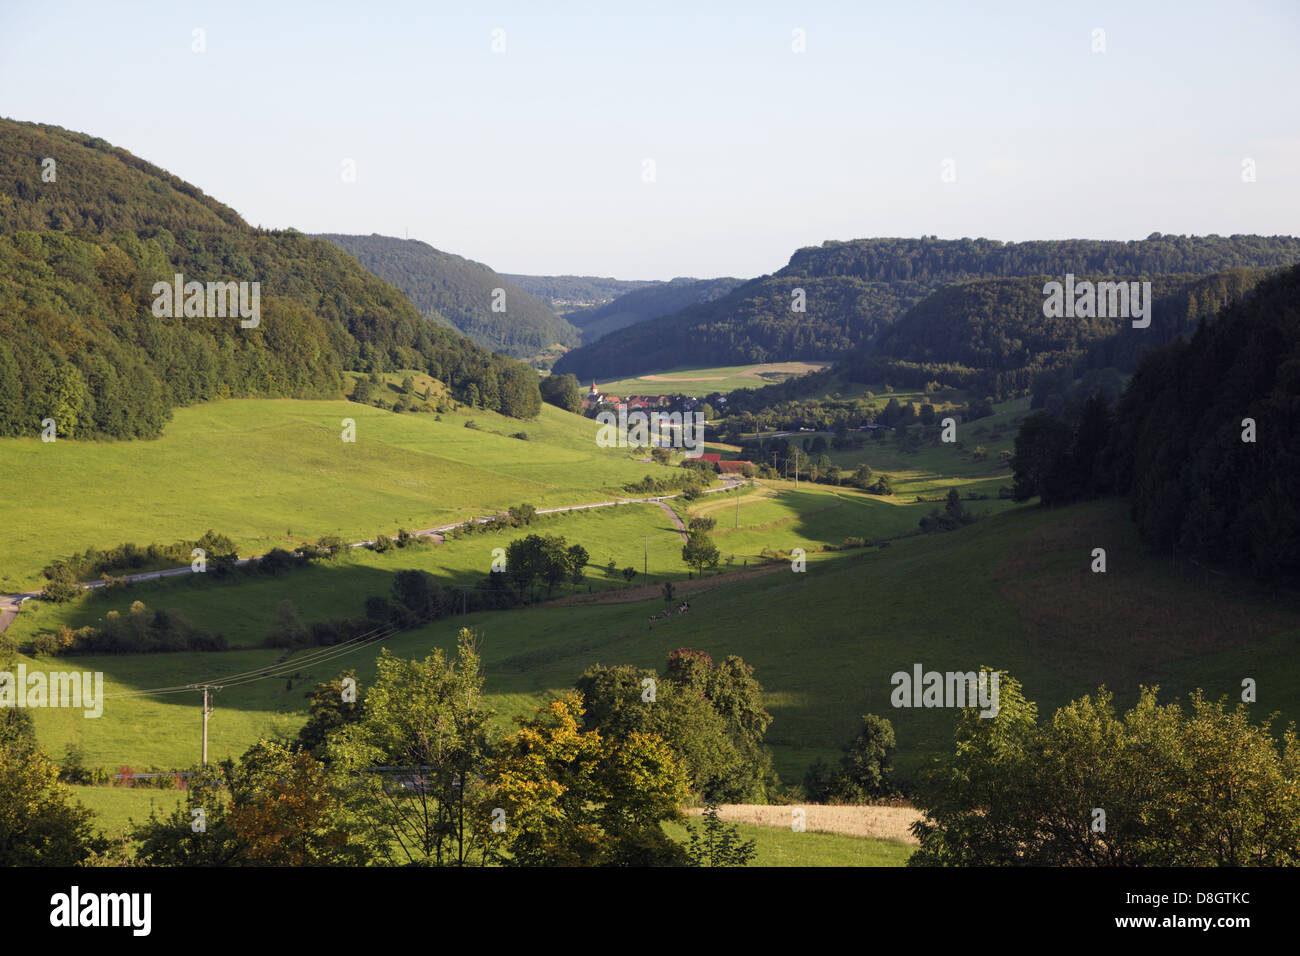 Germany, Baden-Württemberg, Swabian Alb (mountains), epee field, village, street, point of view Stock Photo